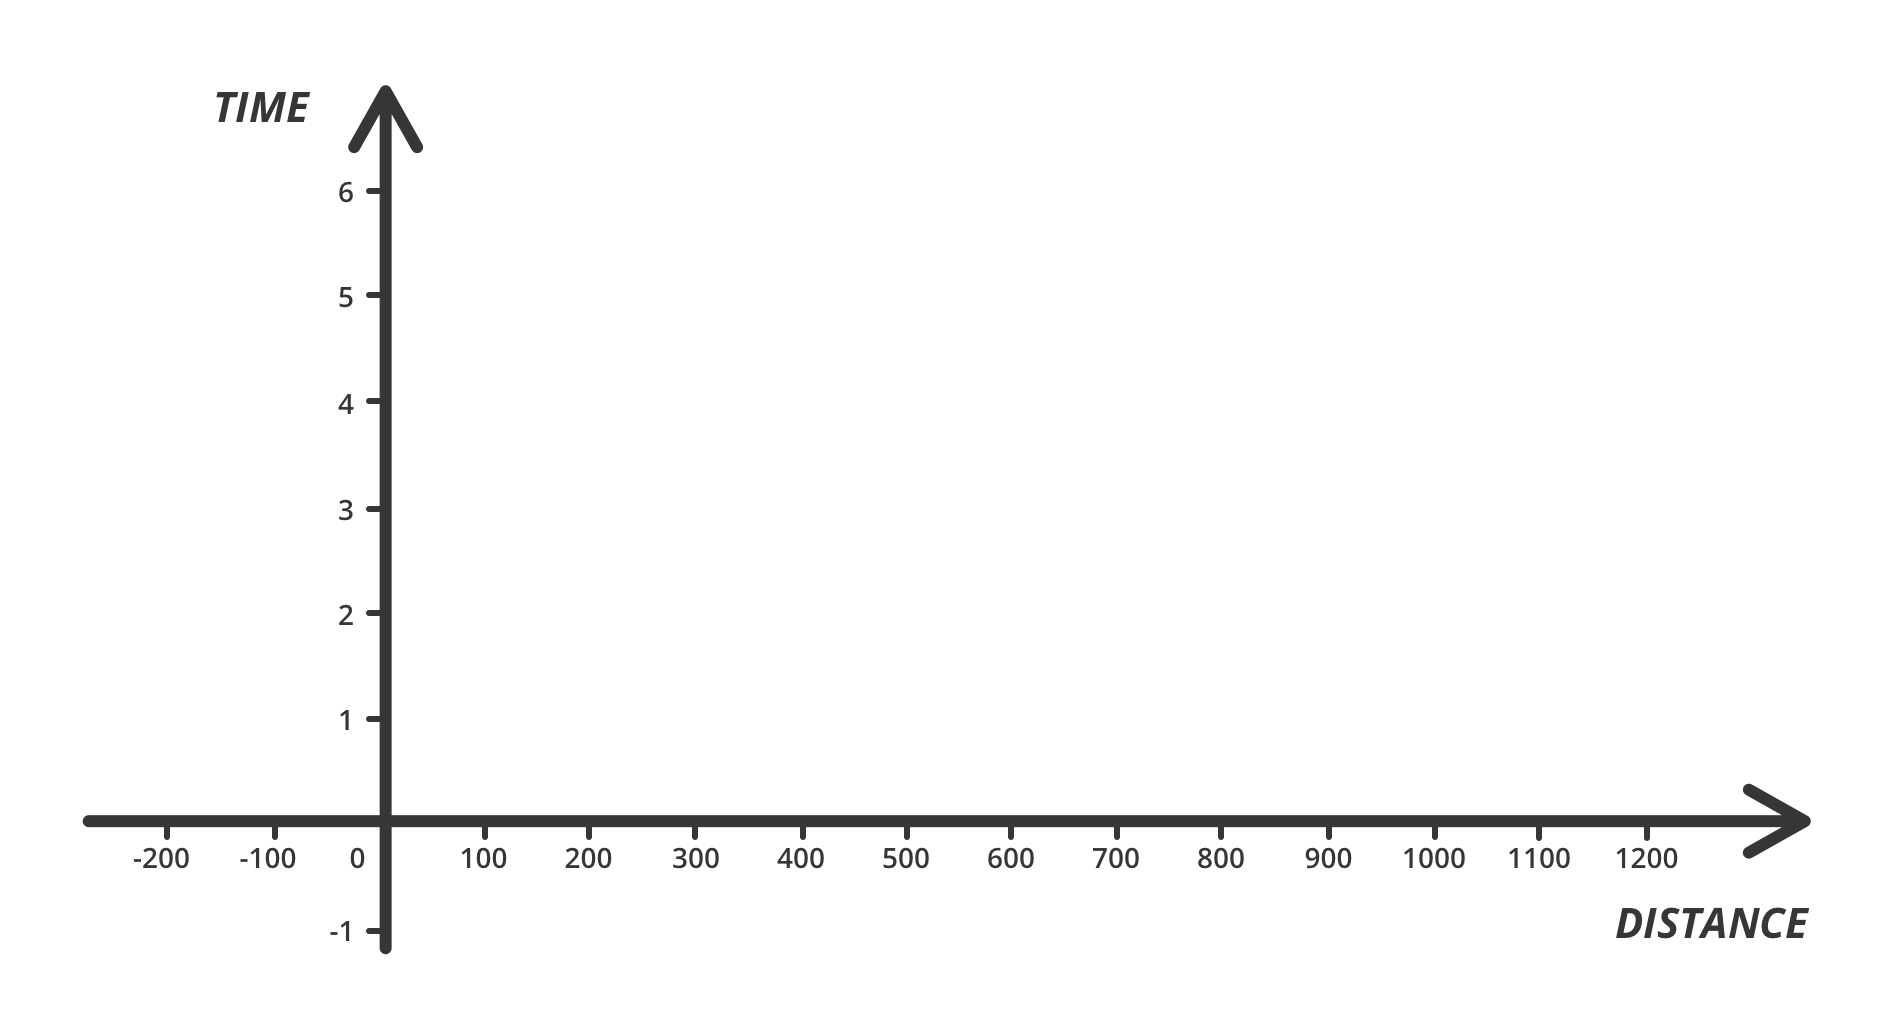 graph showing distance as a function of time